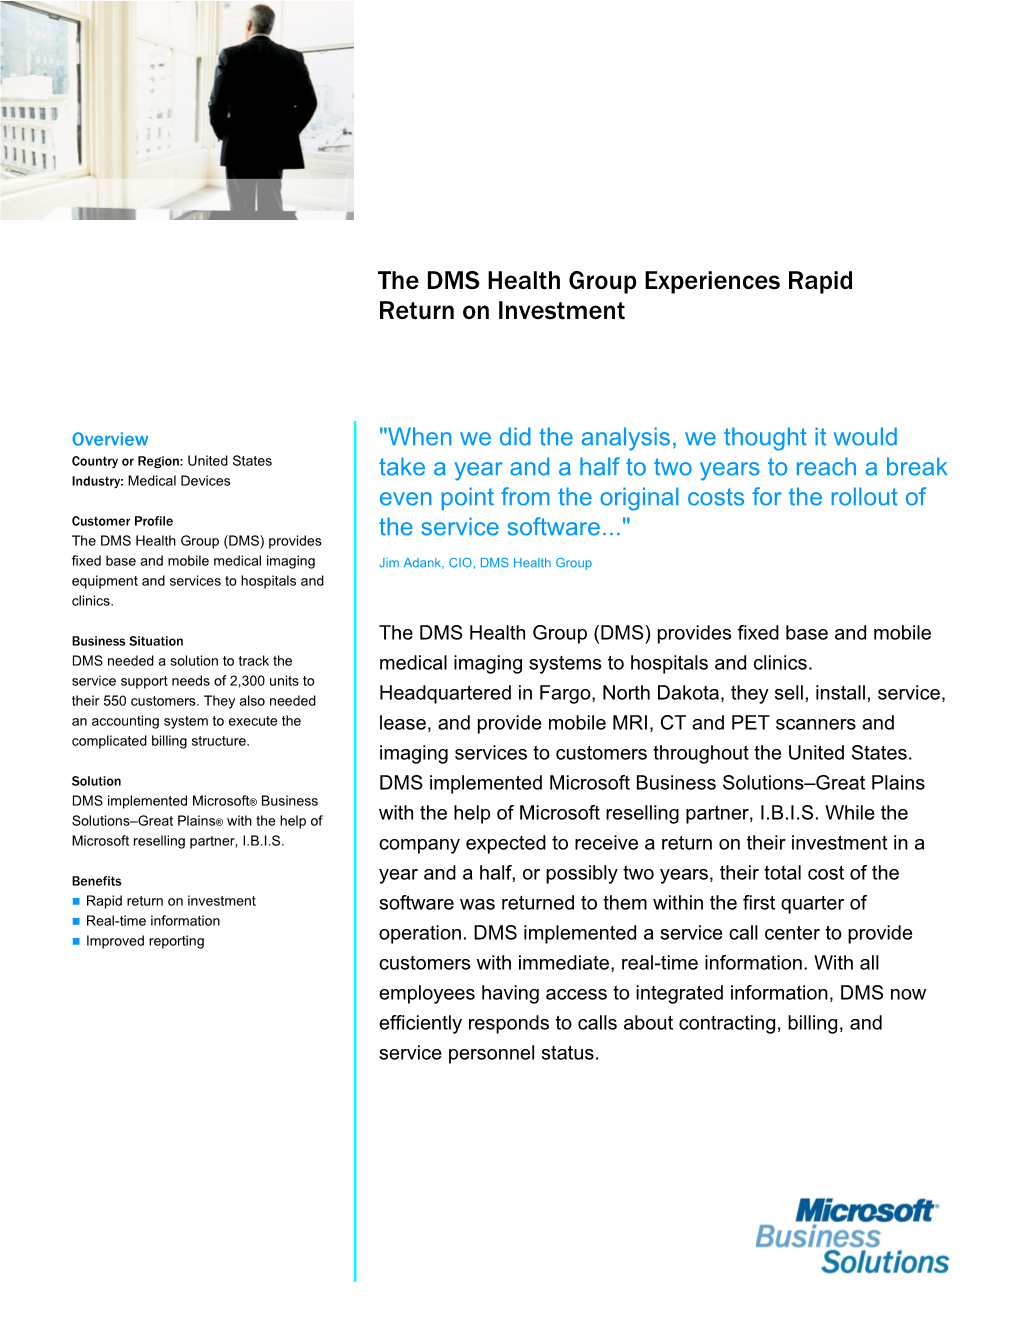 The DMS Health Group Experiences Rapid Return on Investment